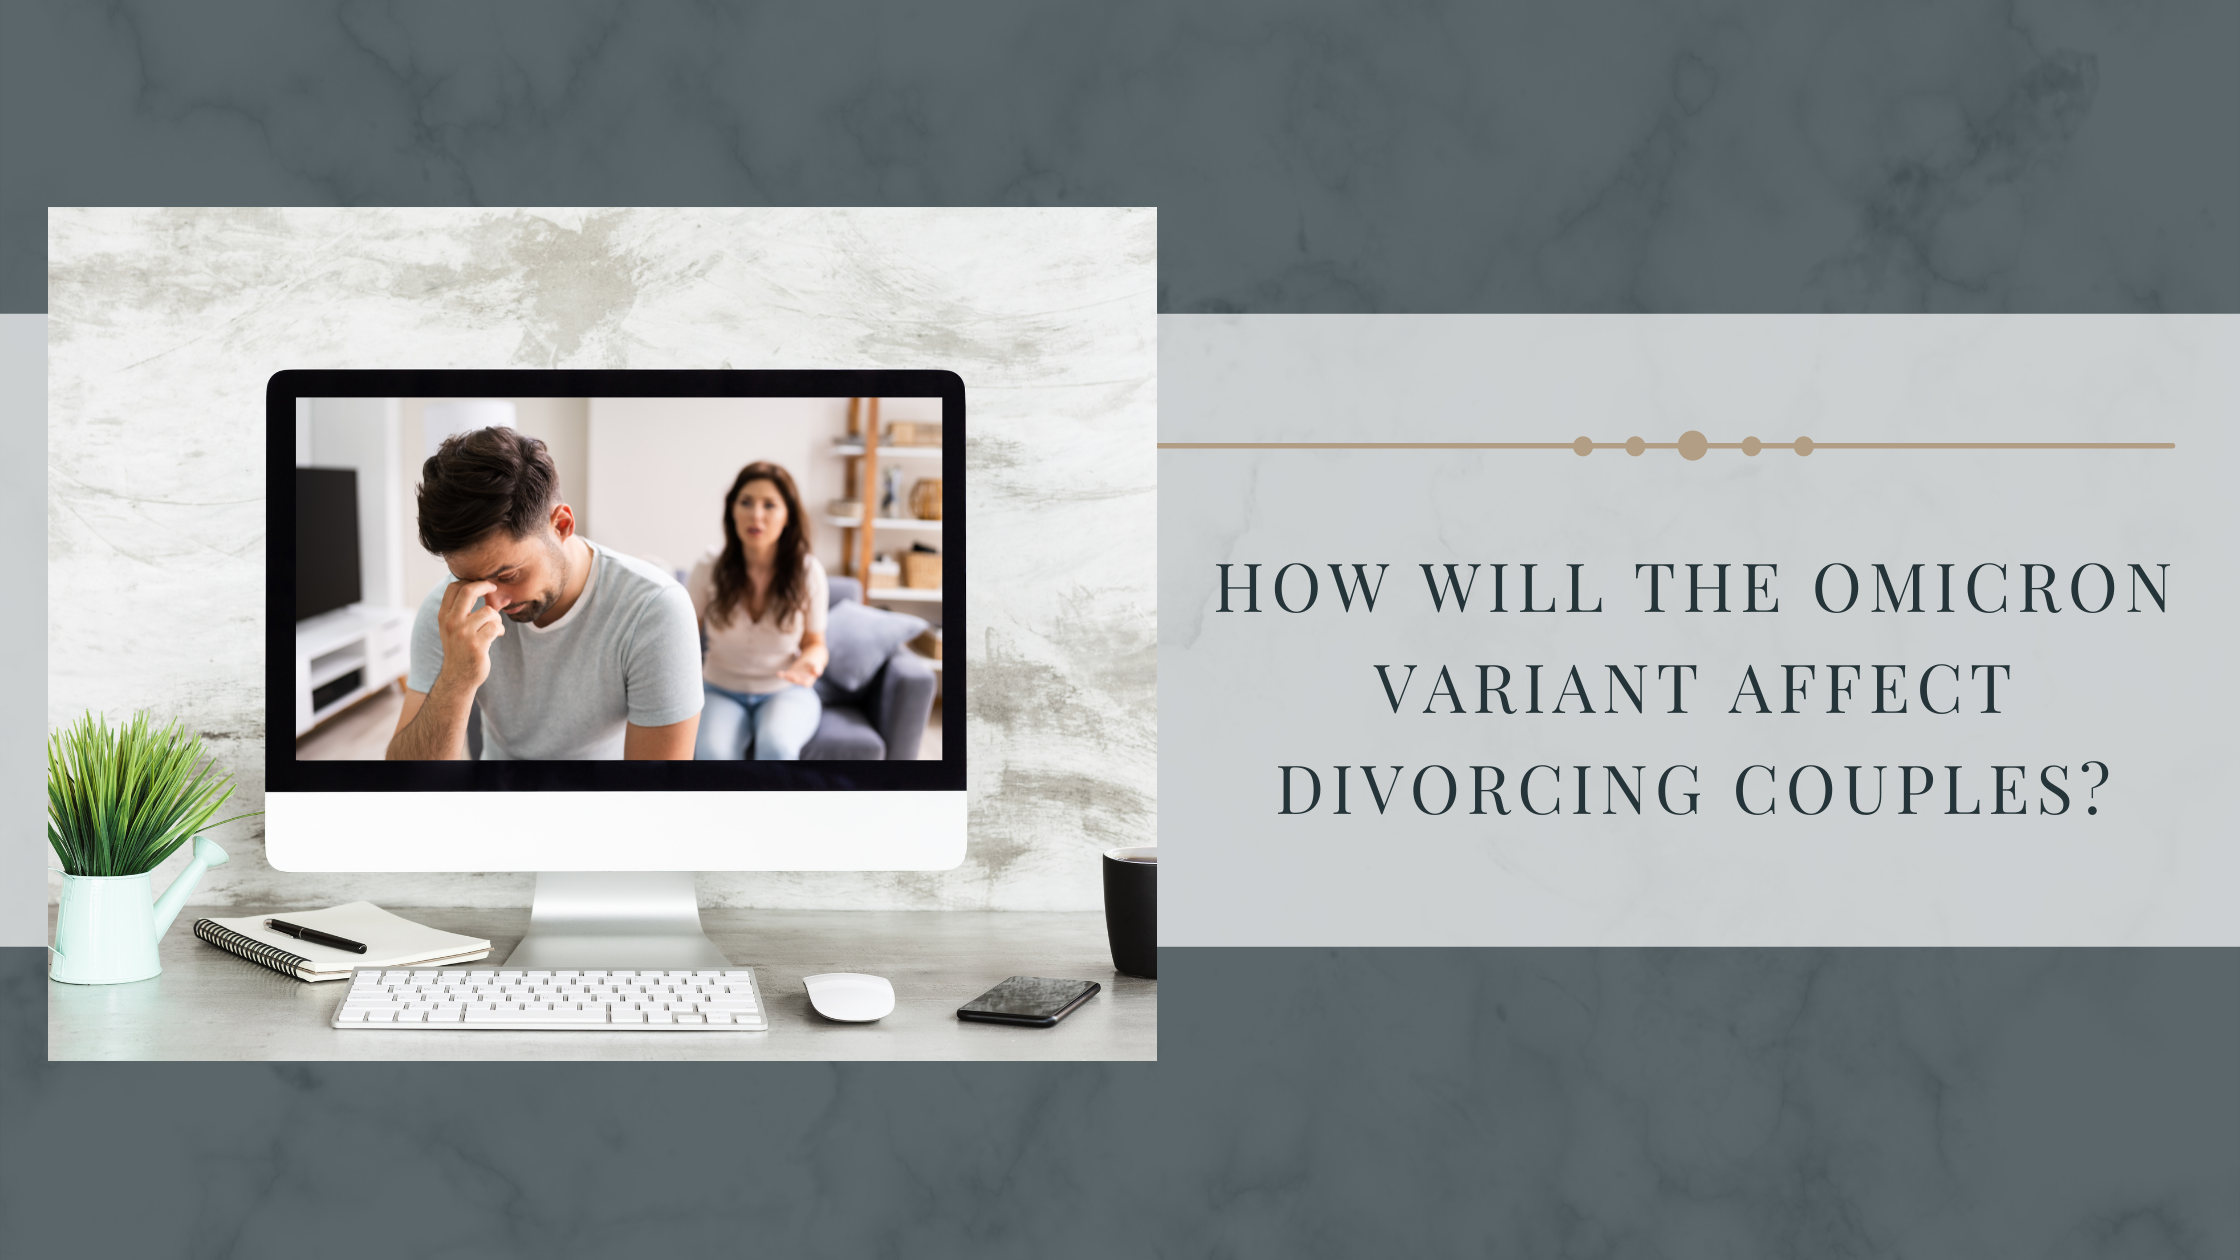 How will the Omicron variant affect divorcing couples?